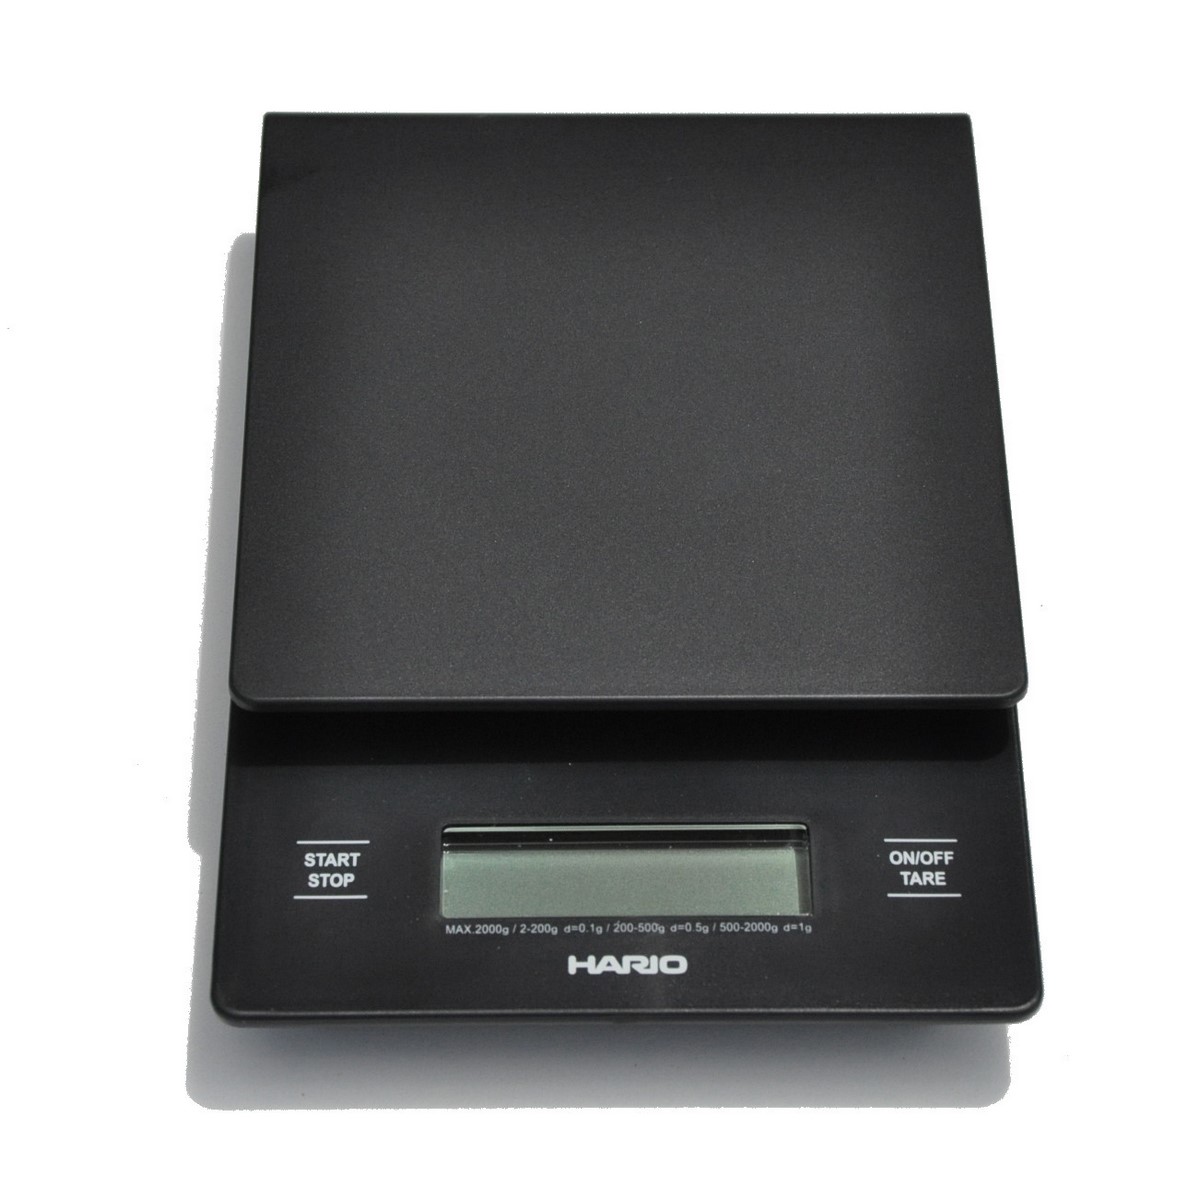 Hario V60 Drip Scale and Timer 